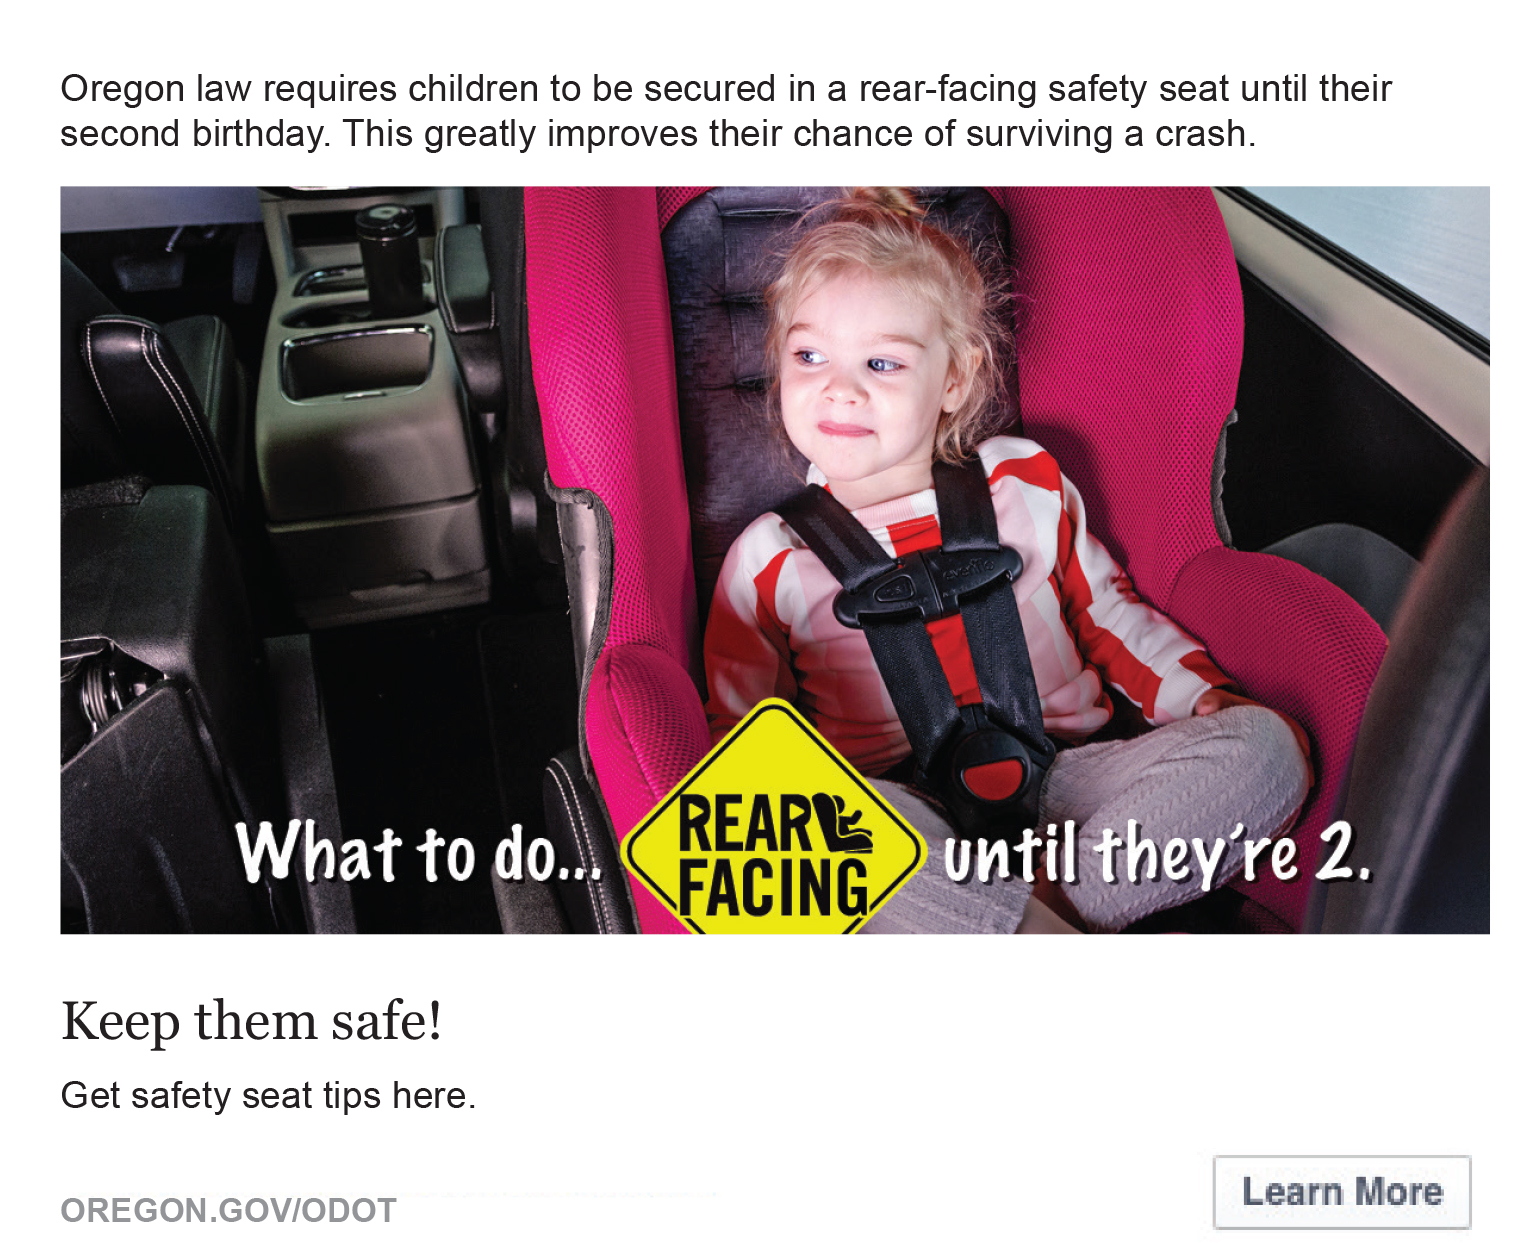 Image of a small girl sitting in a rear facing car seat